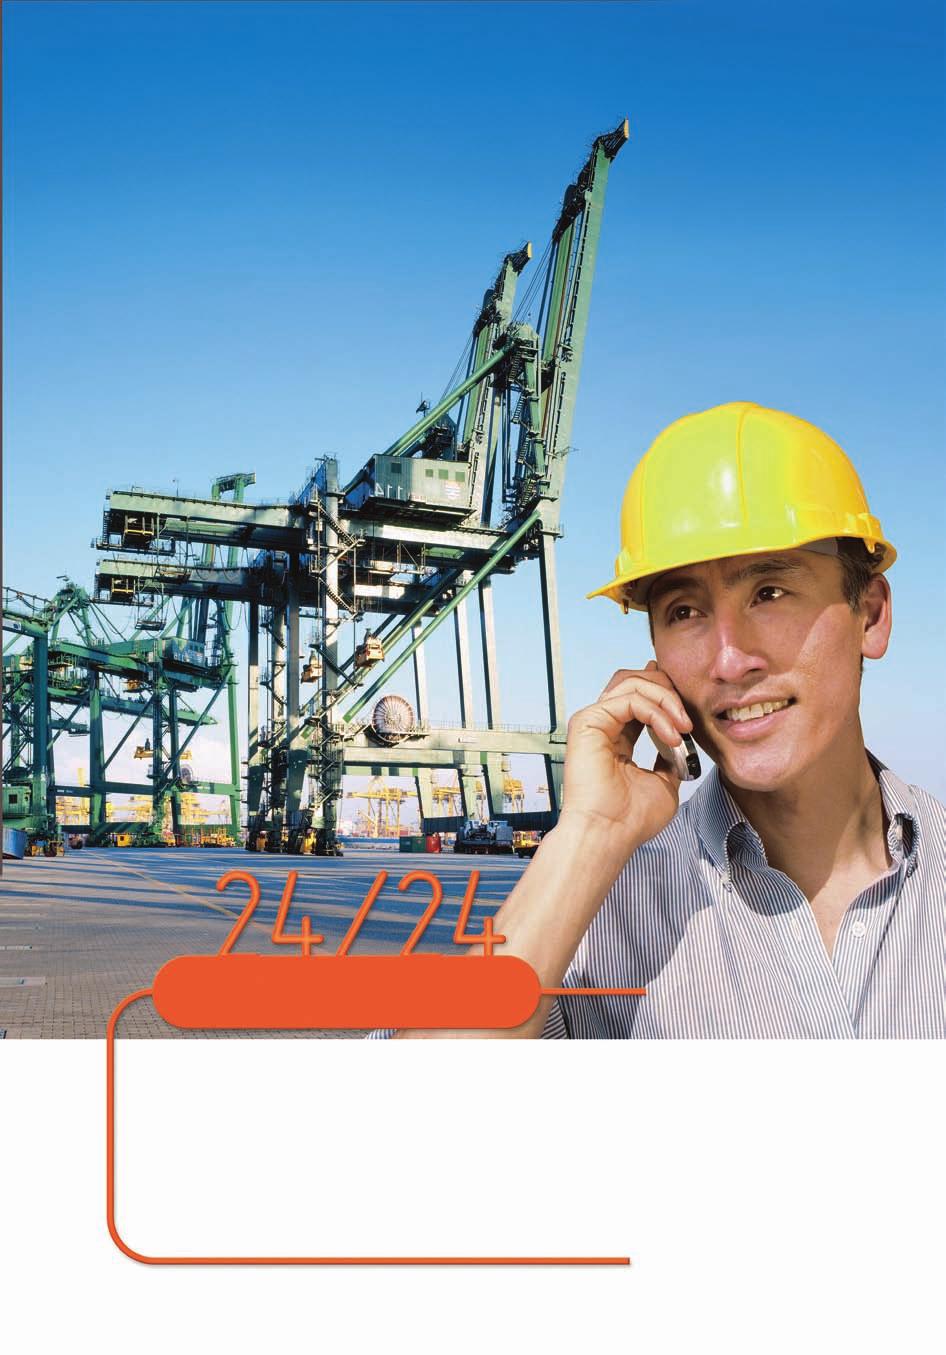 24/24 Repair & Emergency Service Tel: +49 2166 27 2176 Total support round the clock Material handling is a very demanding industry: today cranes need to operate faster and more safely than ever,